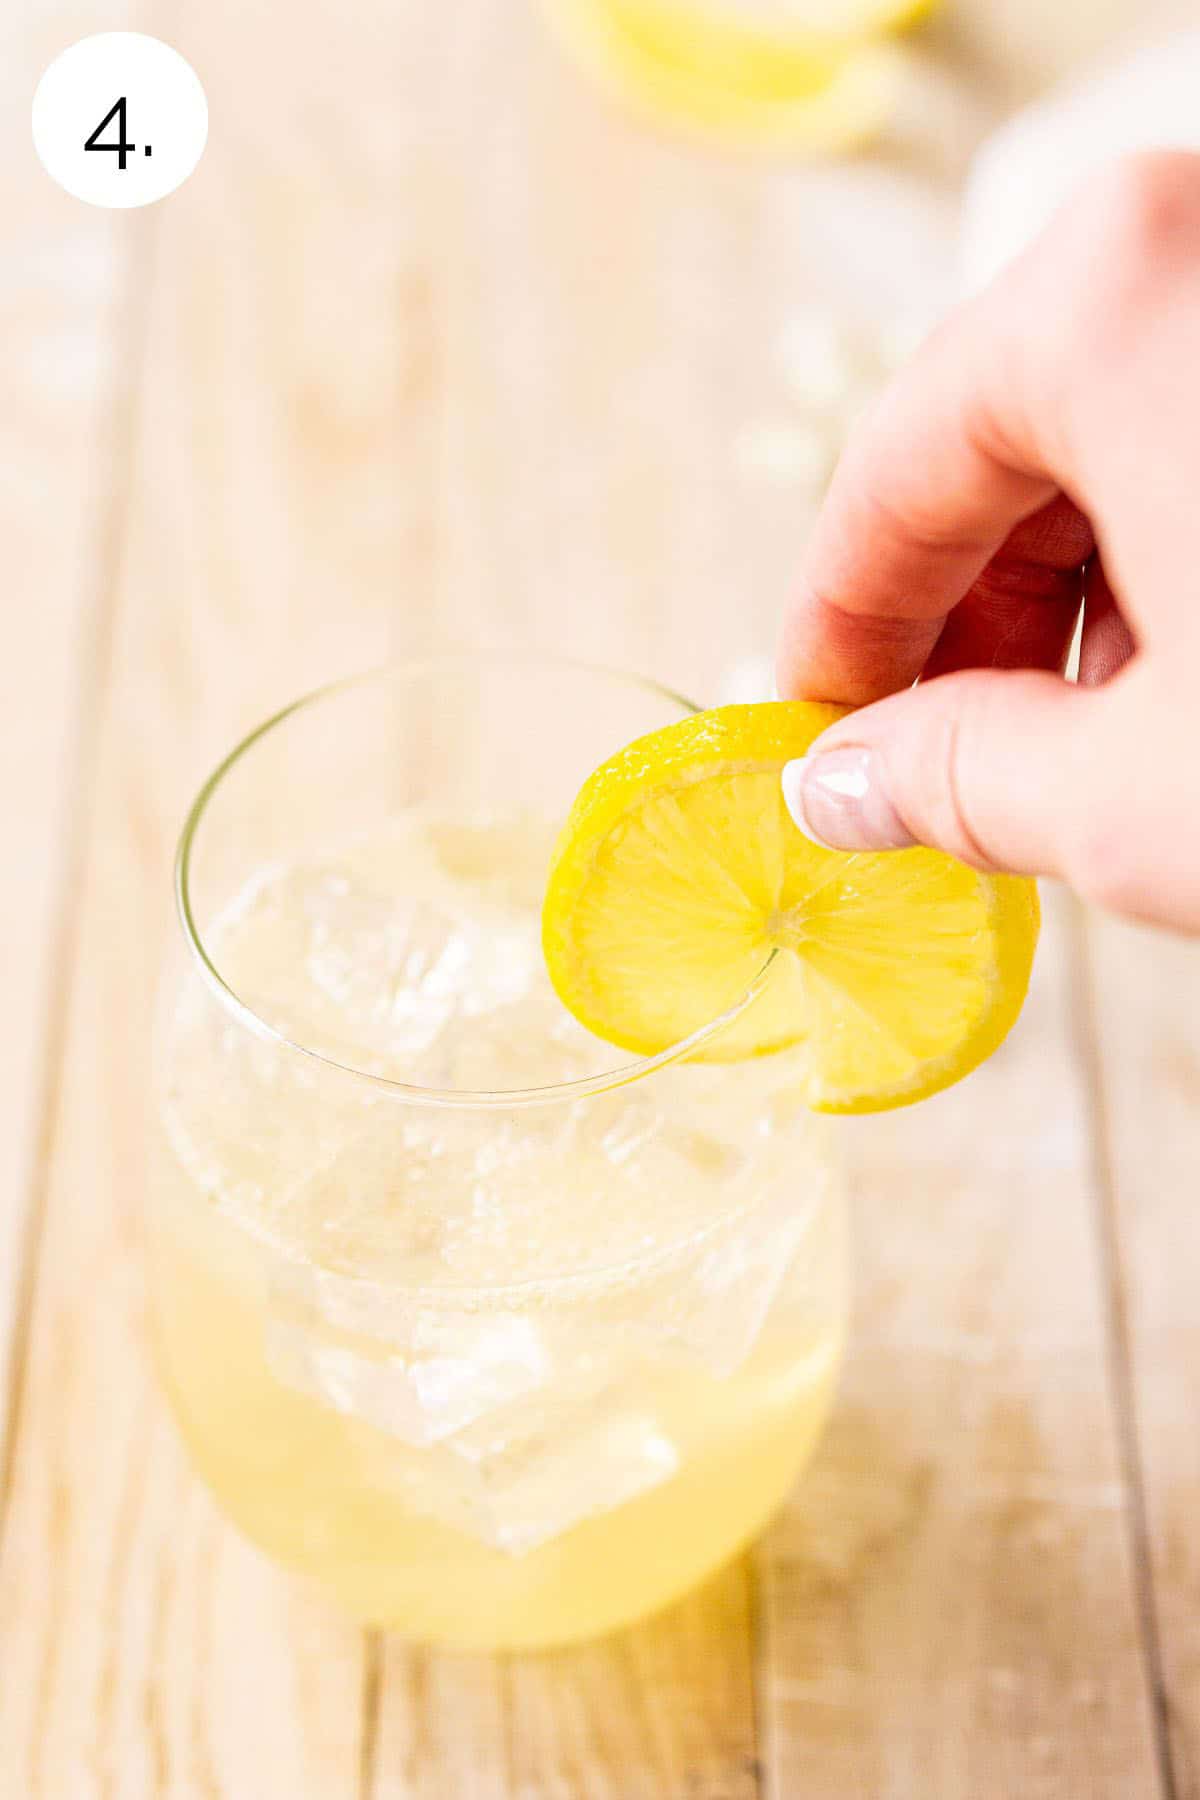 A hand placing a lemon wheel on the rim of the wine glass to garnish for a finishing touch.